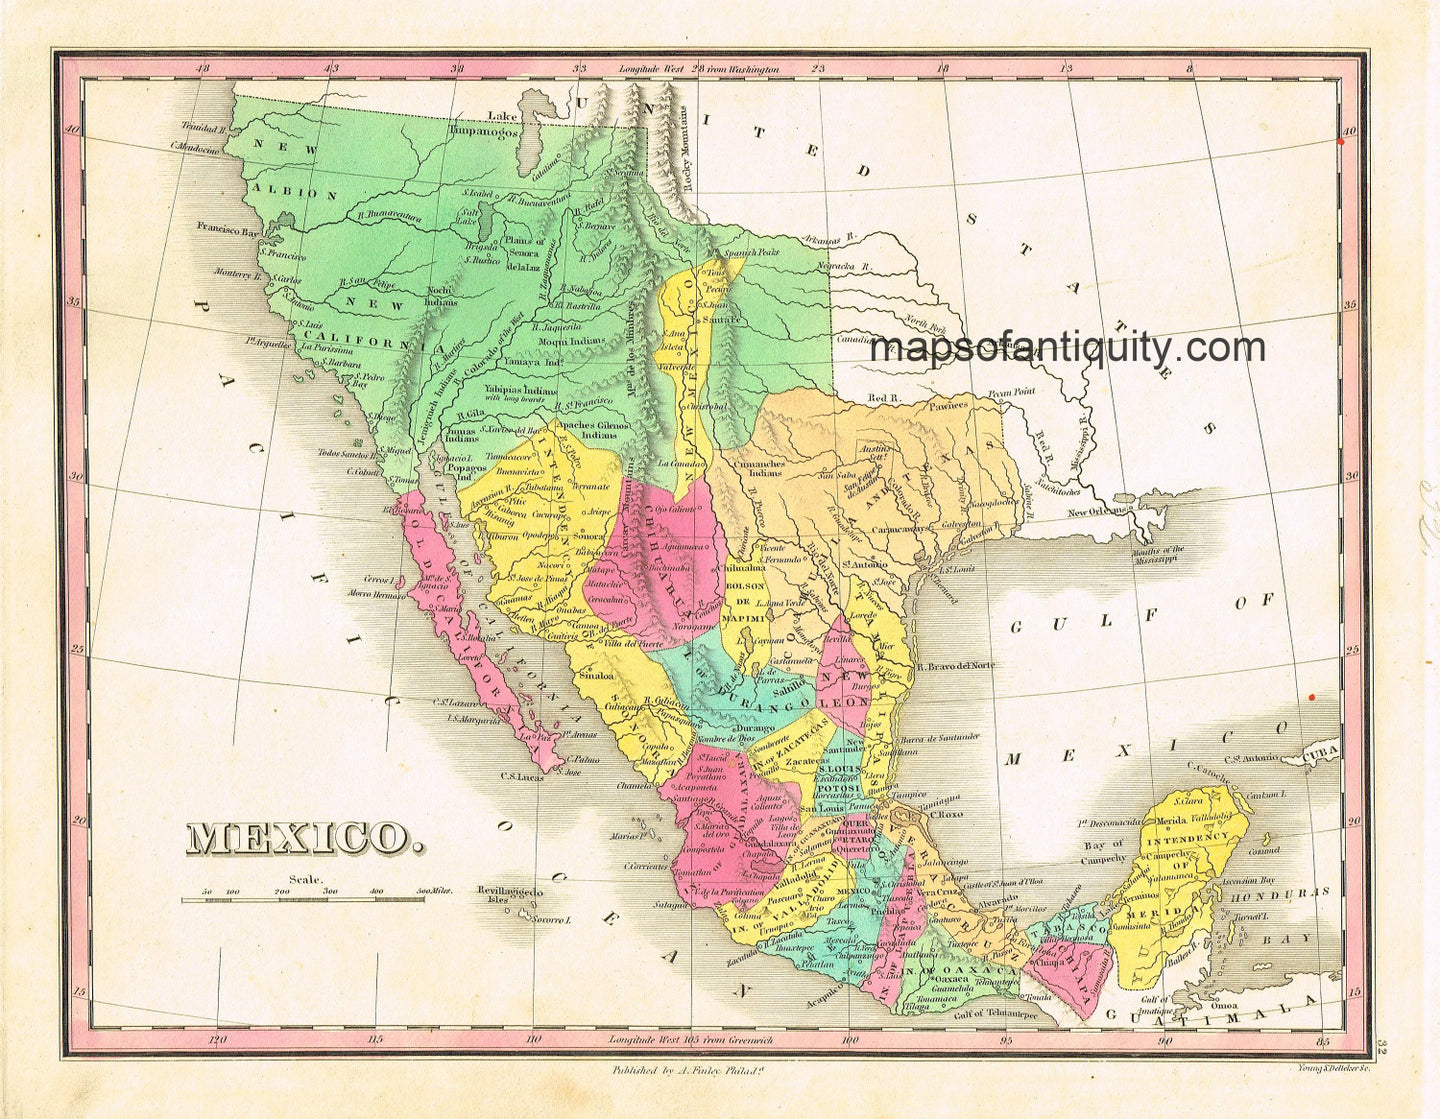 Antique-Hand-Colored-Map-Mexico-North-America-Mexico-1832-Anthony-Finley-Maps-Of-Antiquity